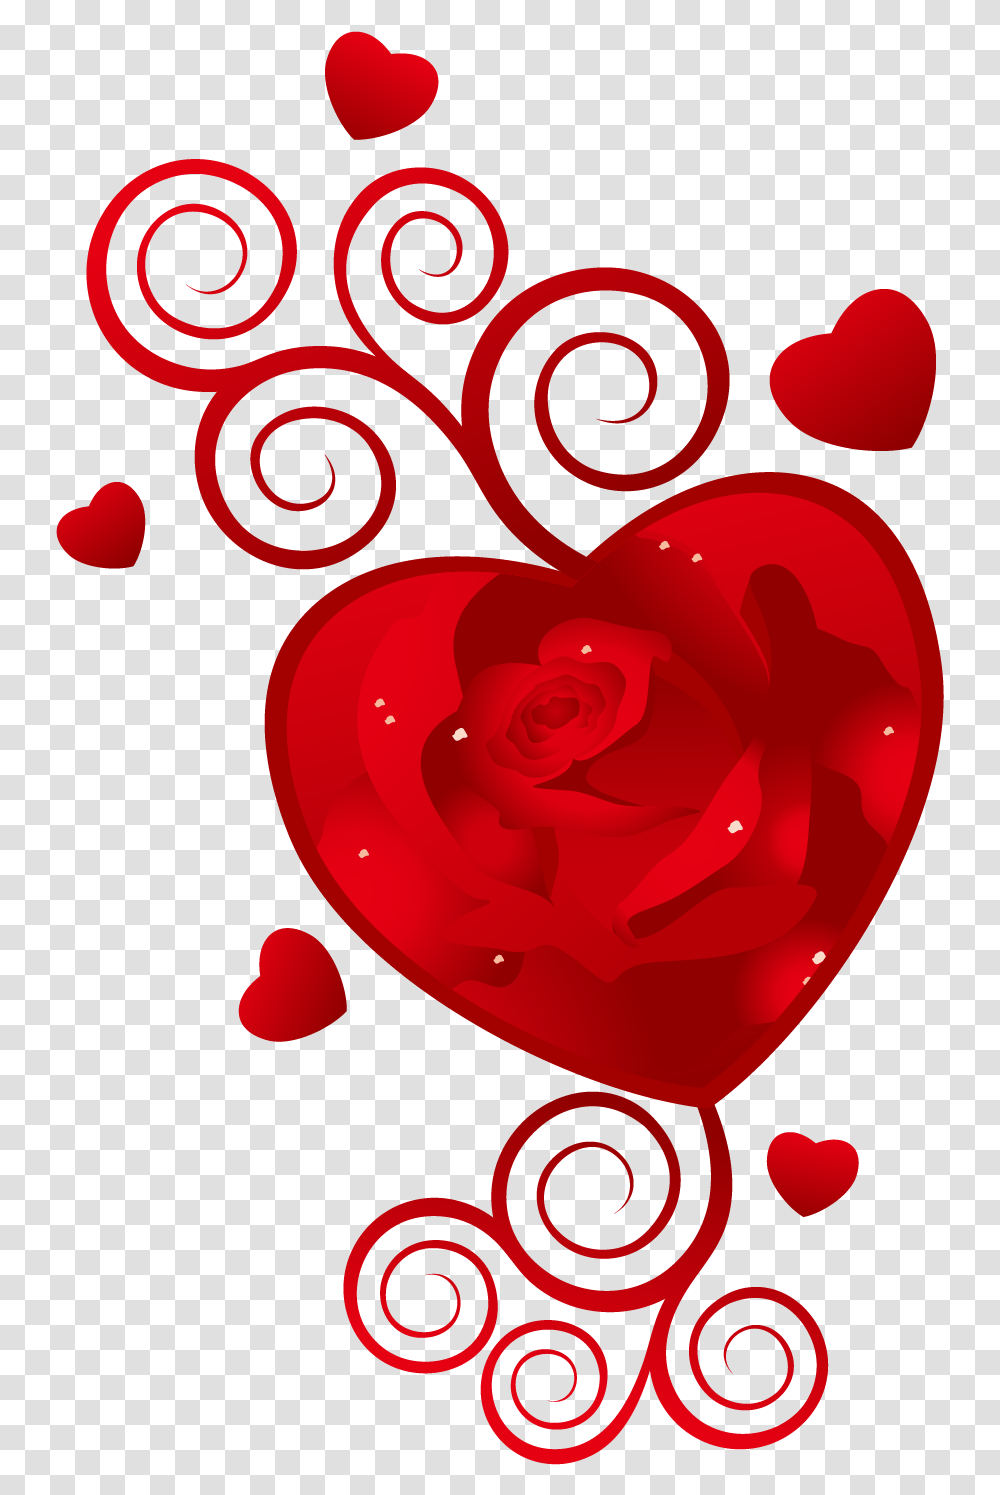 Download Heart February 14 Wish Valentines Vector Rose Good Morning Happy Valentine Day 2020, Plant, Flower, Blossom, Wax Seal Transparent Png